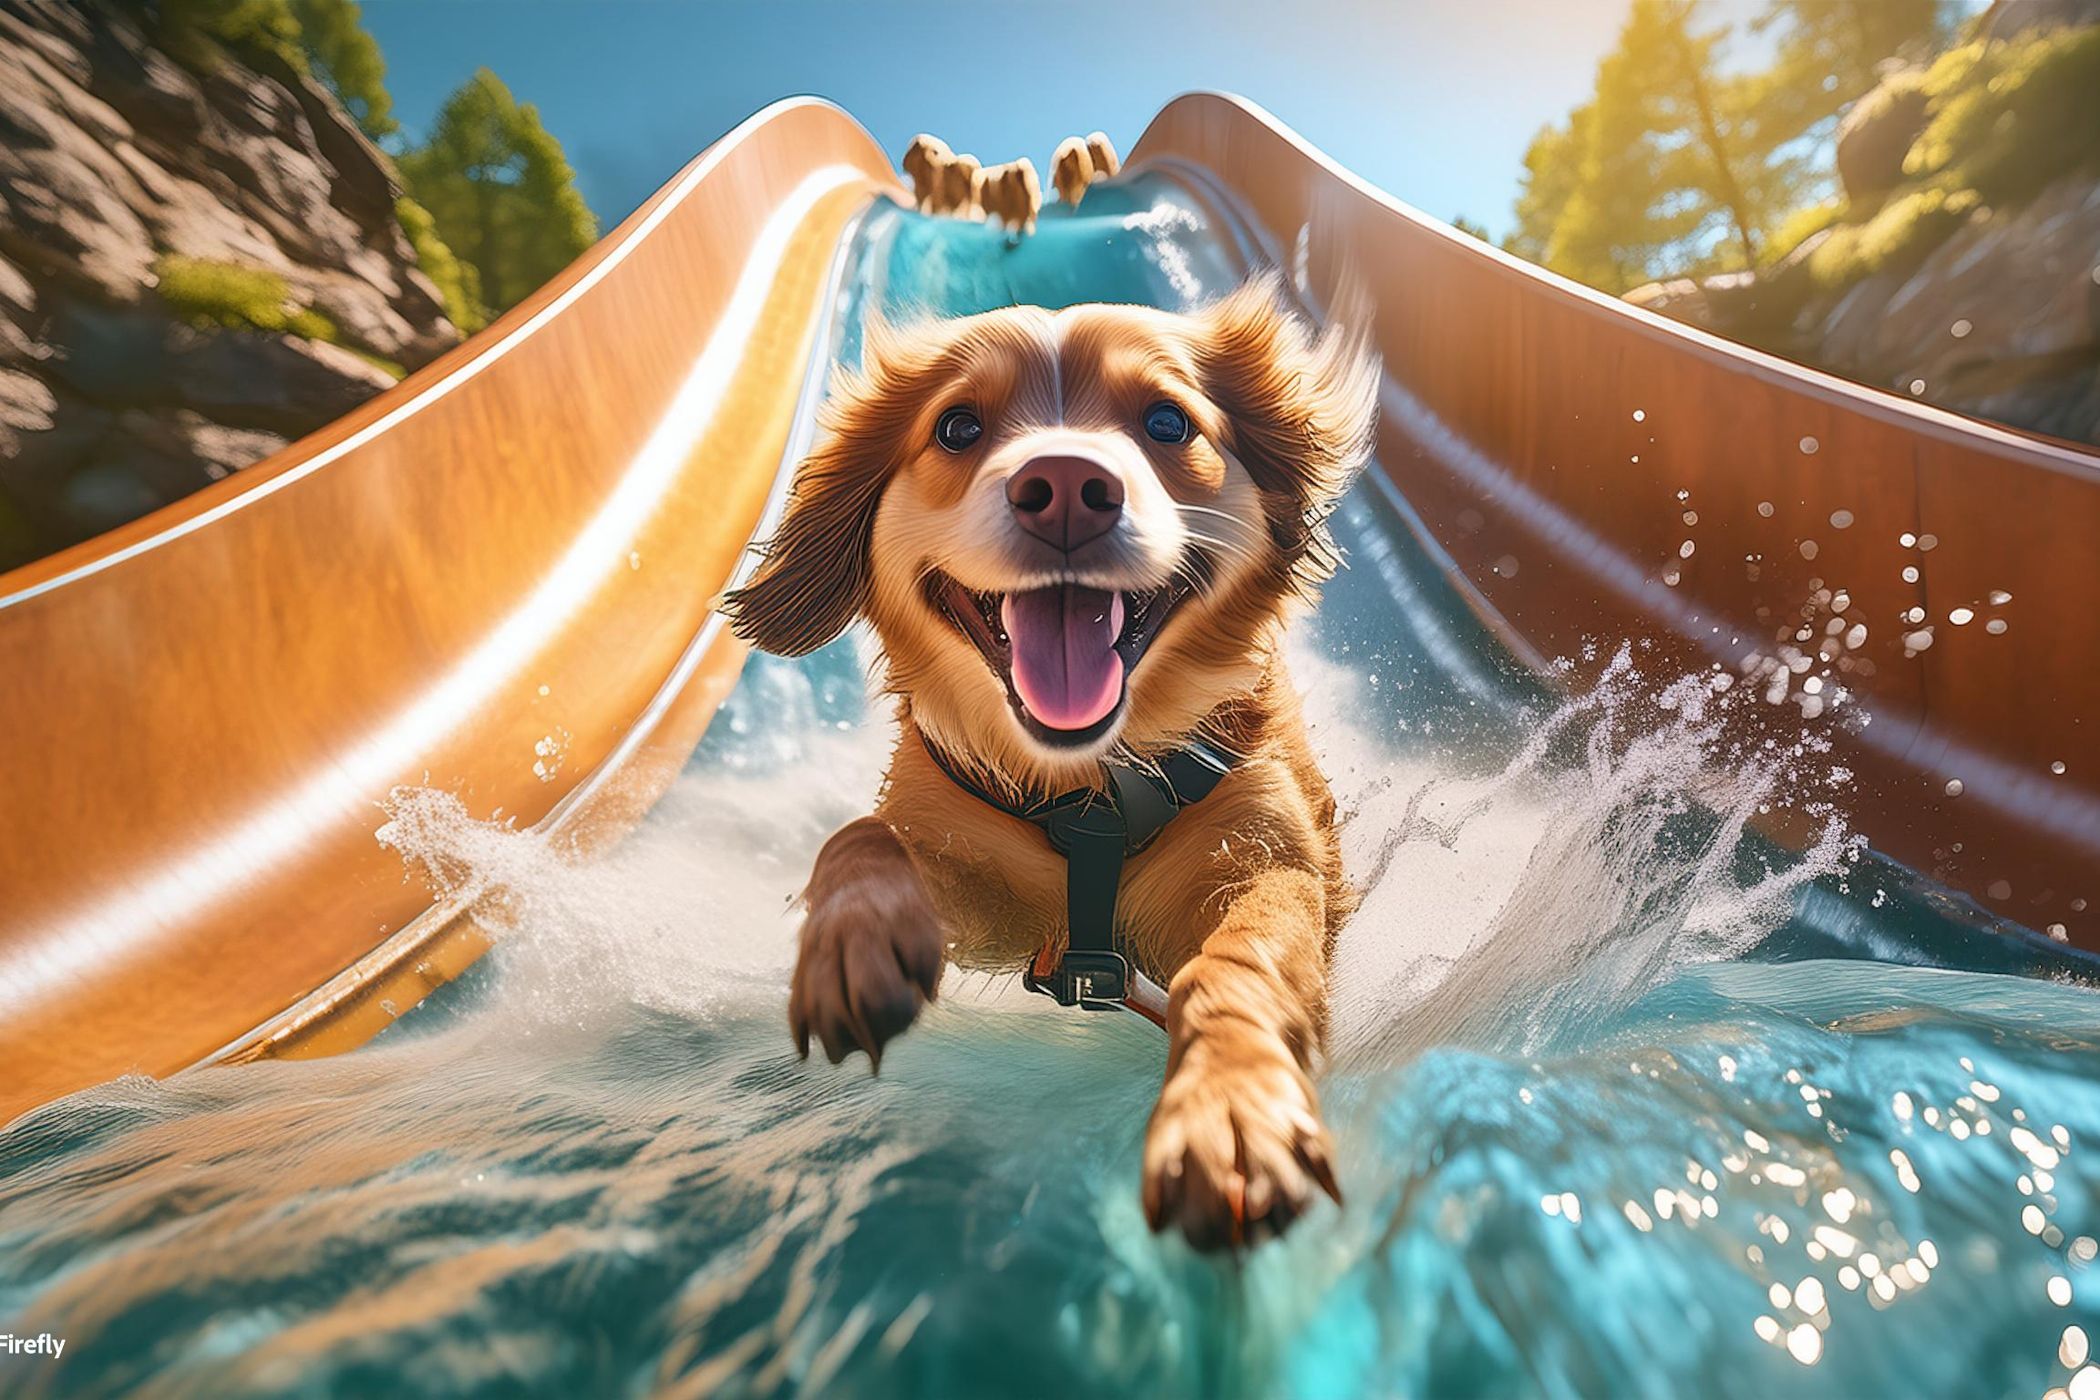 An Adobe Firefly Image 3 image of a dog on a waterslide